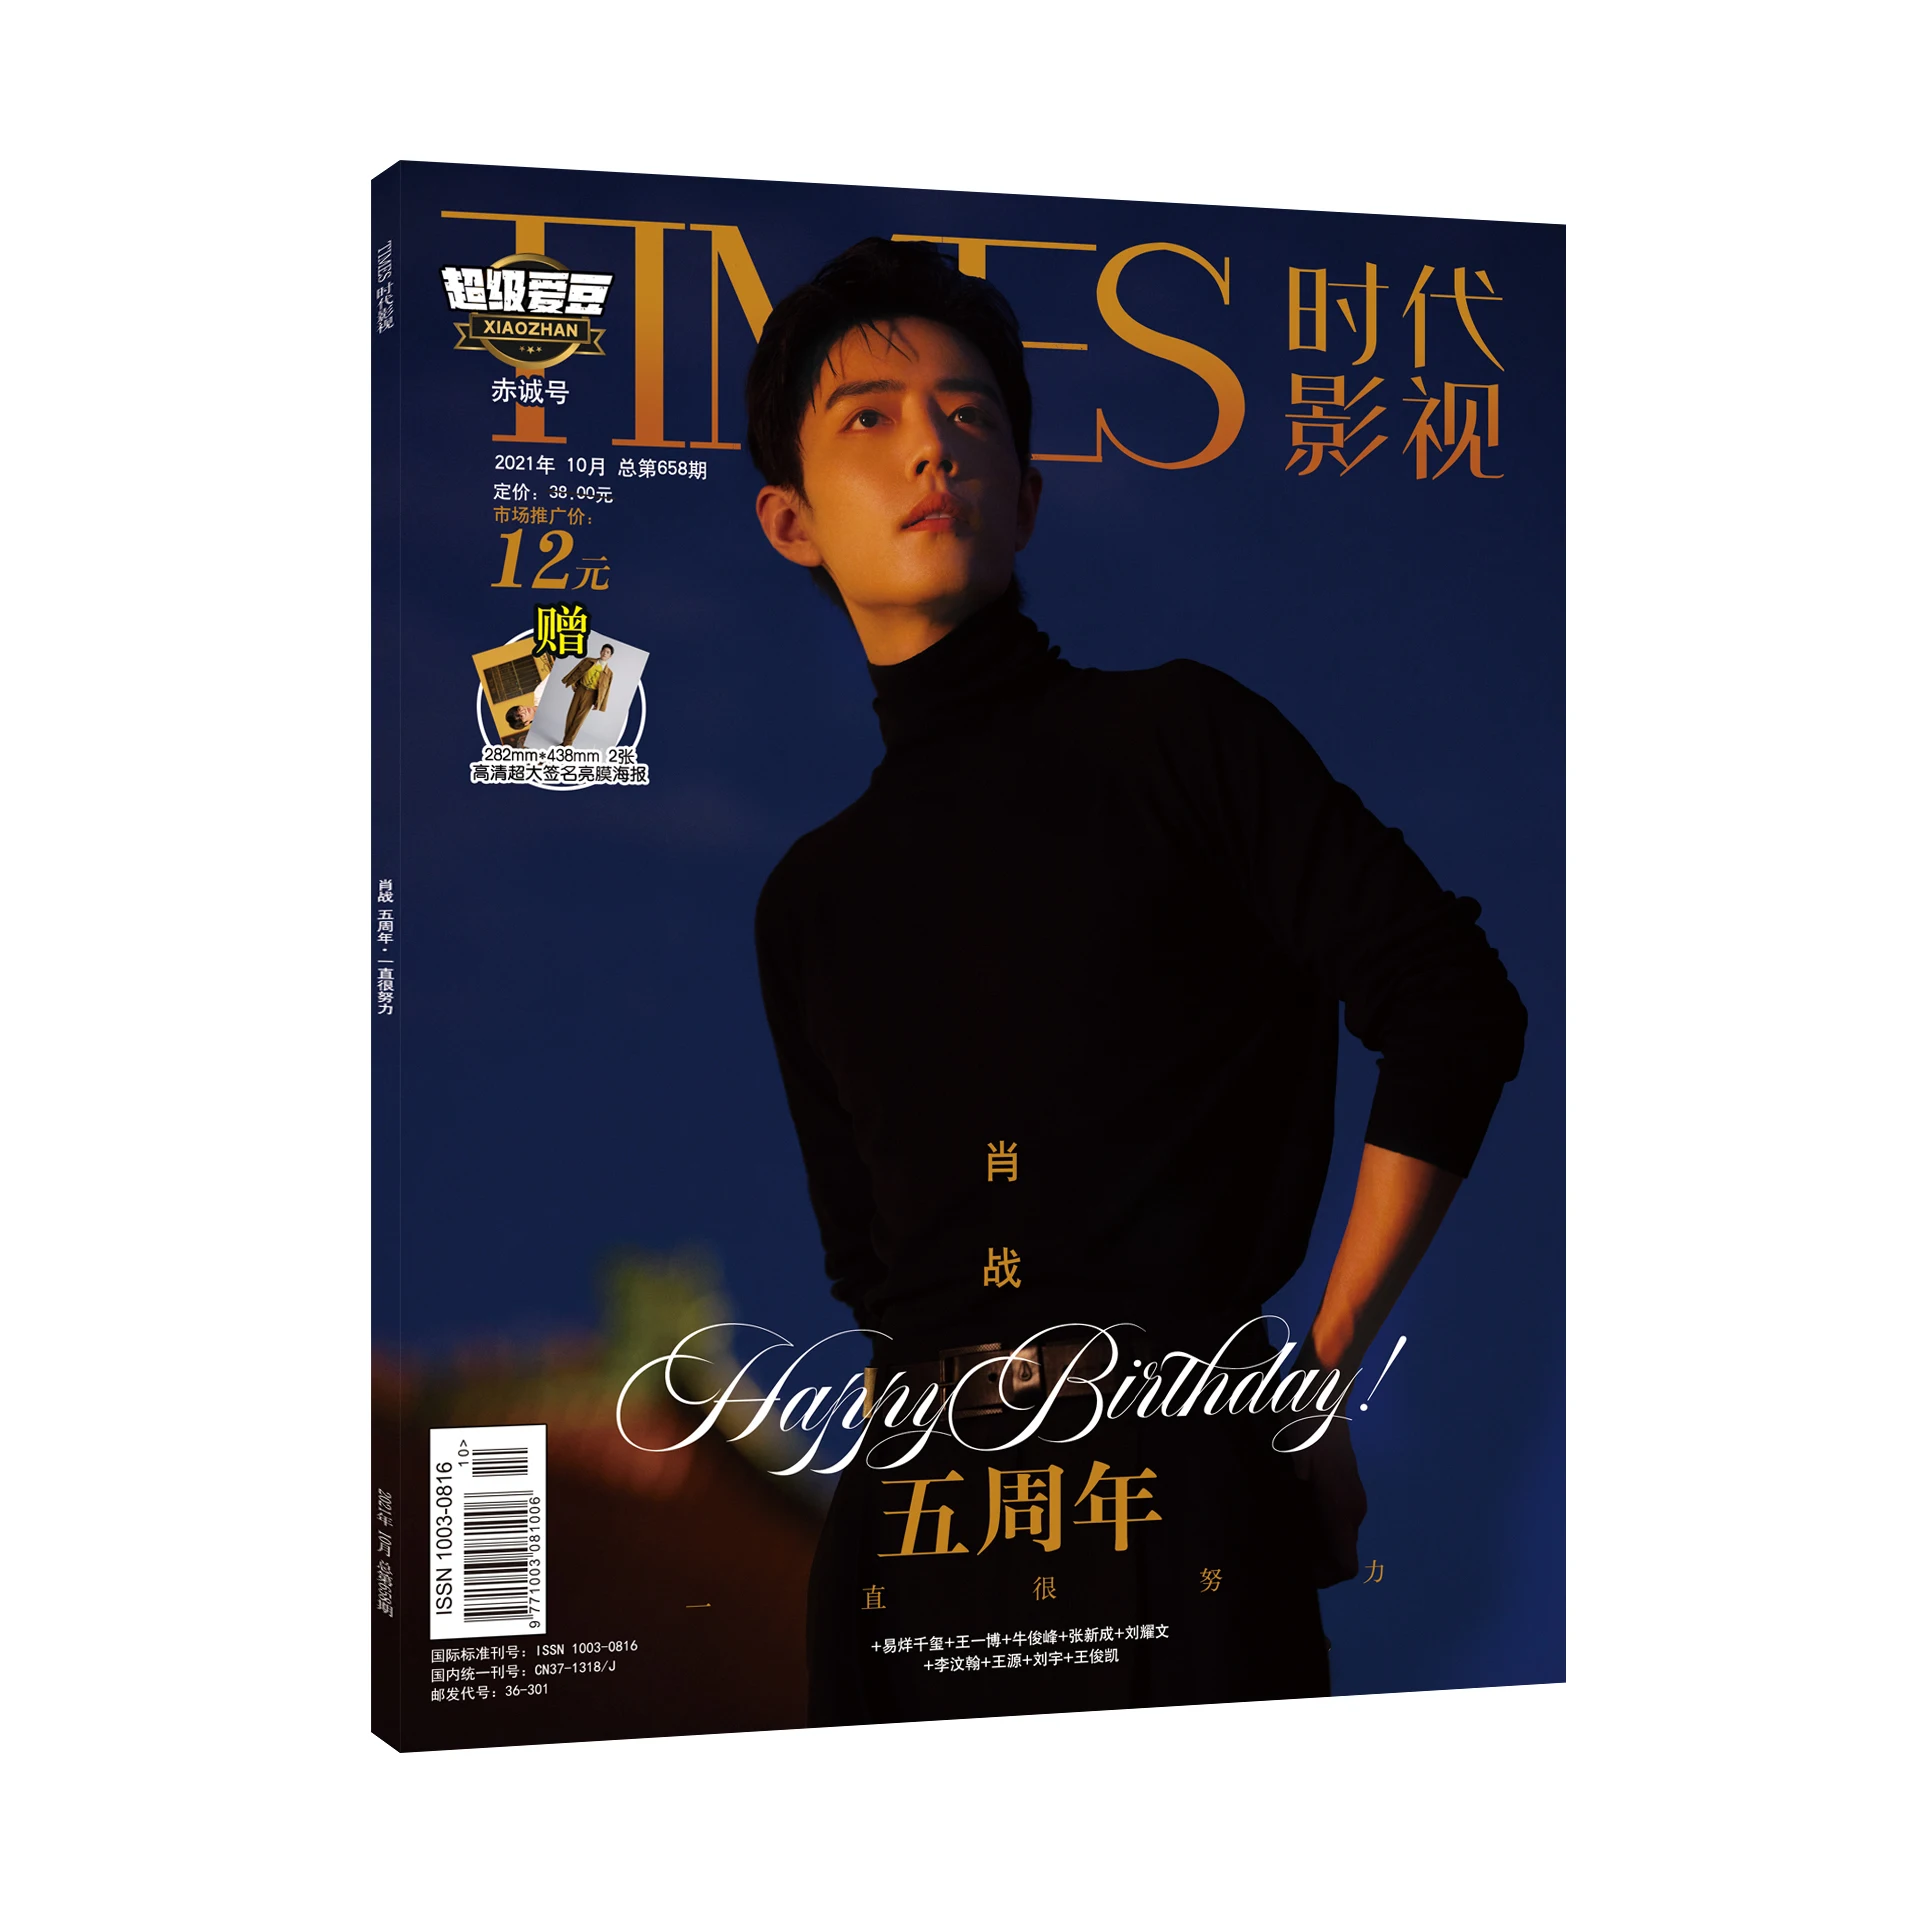 New Times Film Magazine (October 2021) Xiao Zhan 5th Anniversary Cover Painting Album Book Photo Star Around | Канцтовары для офиса